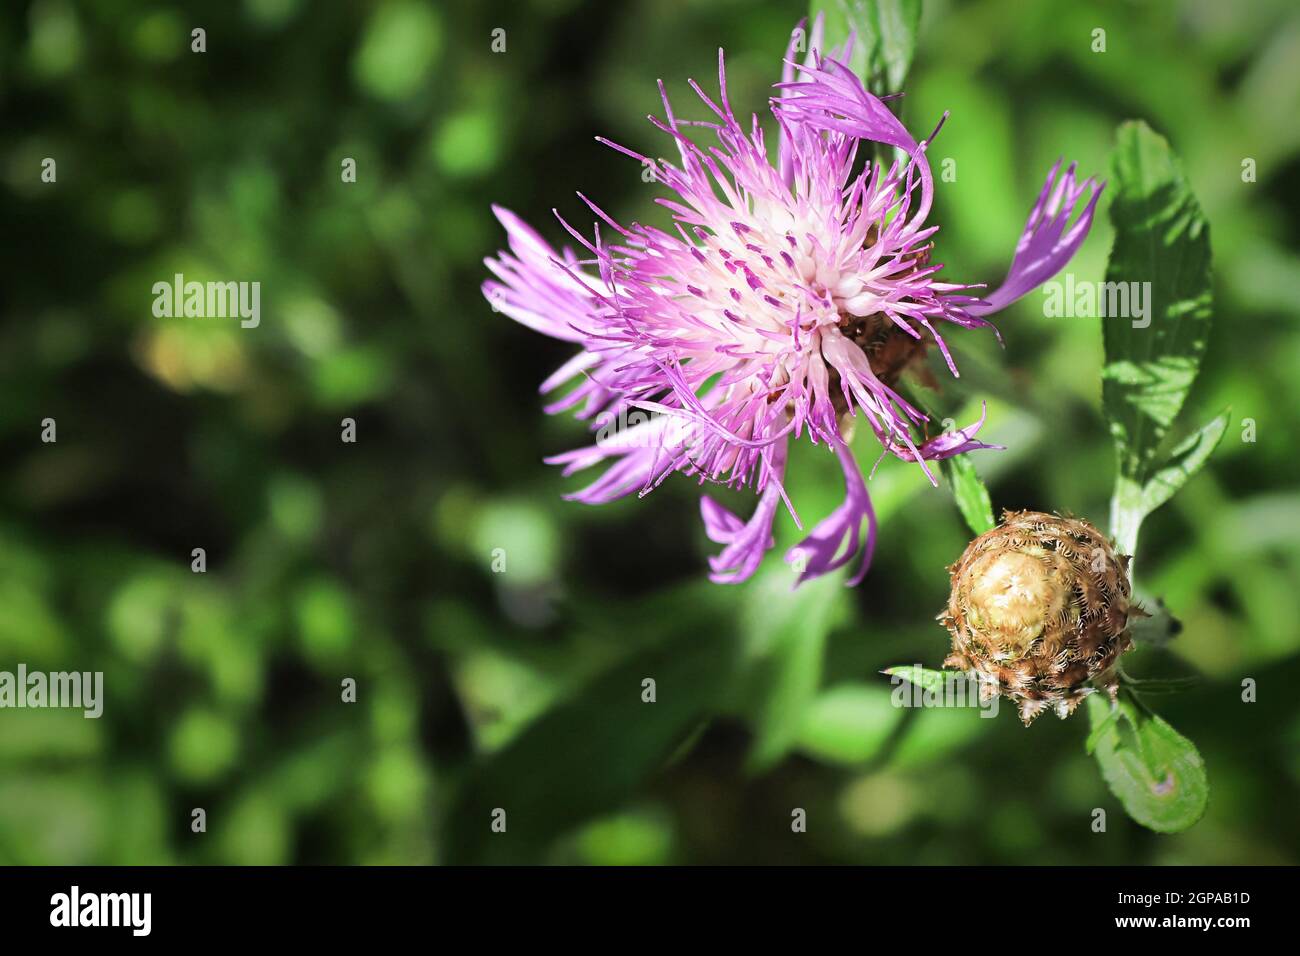 Background of pink knapweed flowers in bloom. Stock Photo